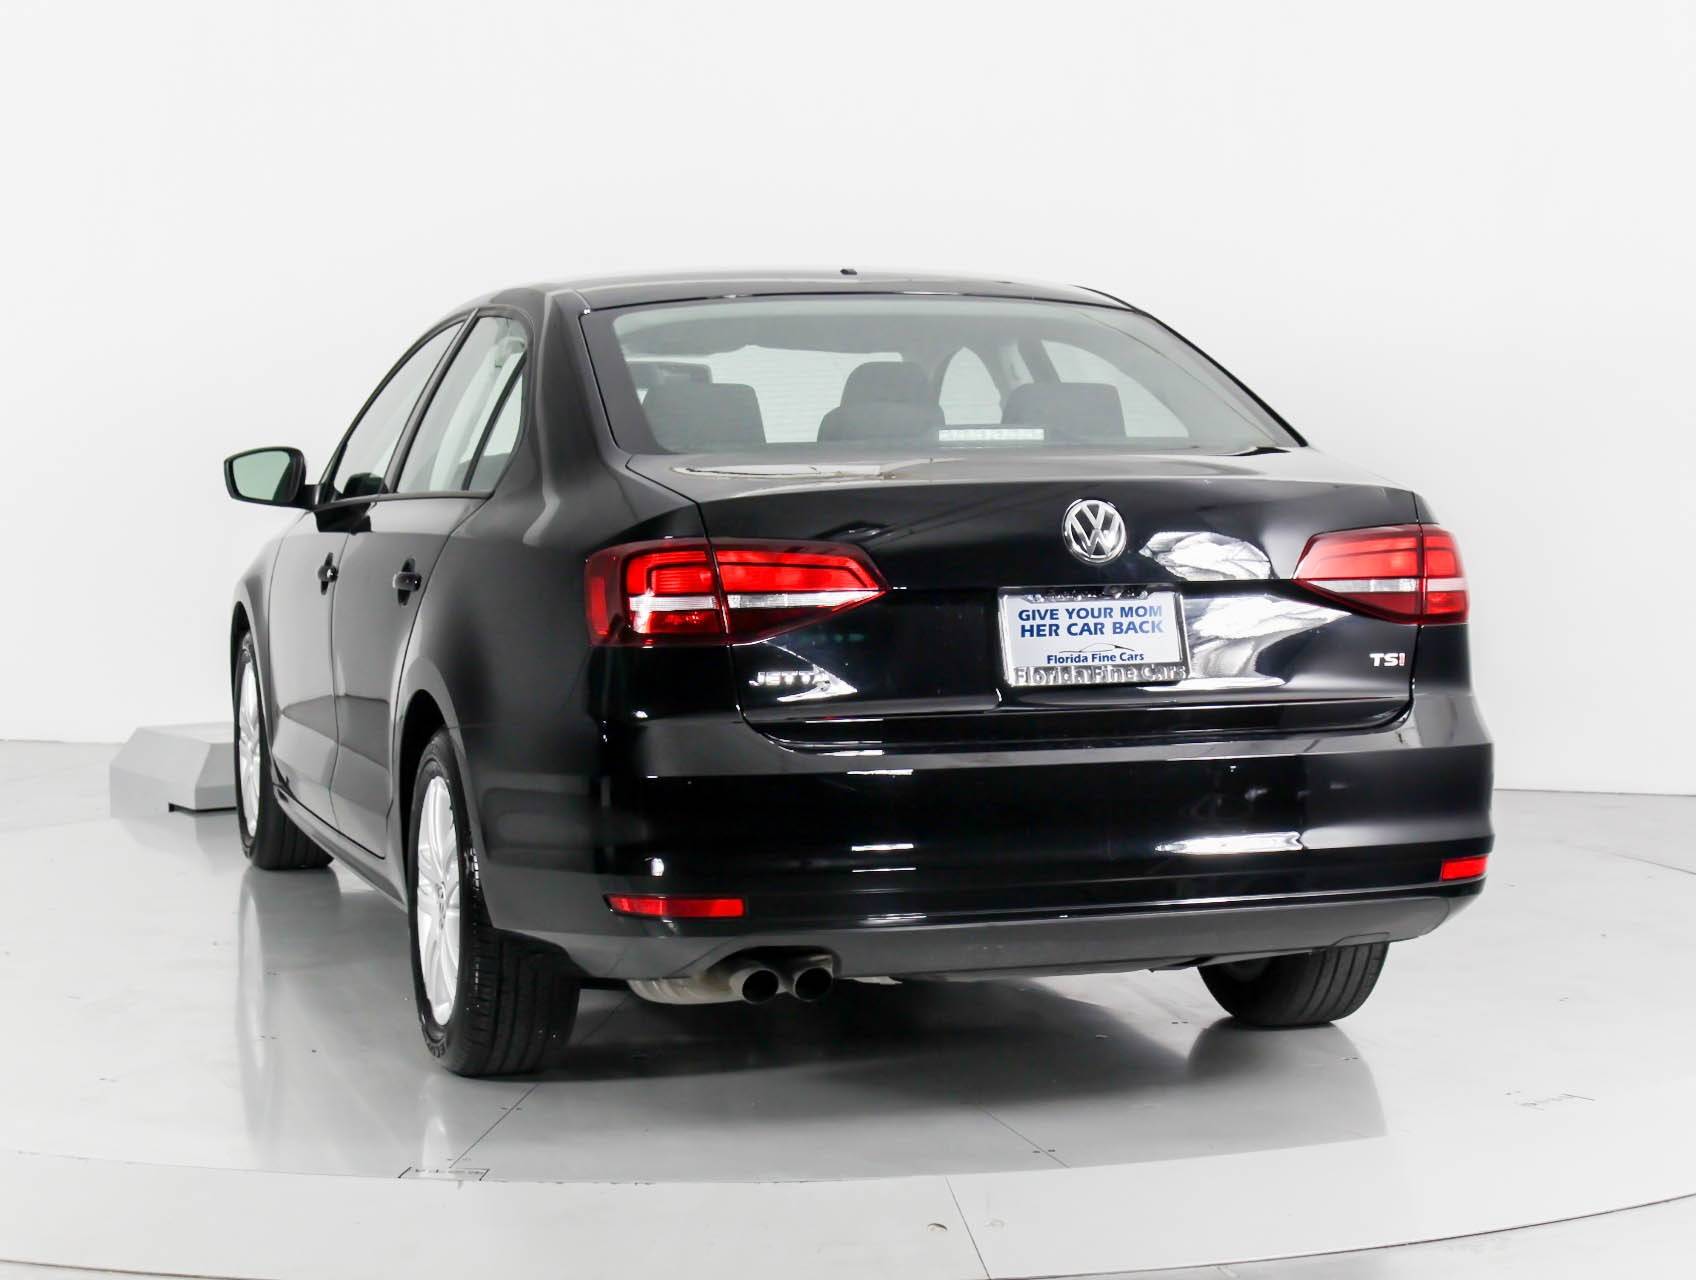 Florida Fine Cars - Used VOLKSWAGEN JETTA 2018 WEST PALM 1.4T S